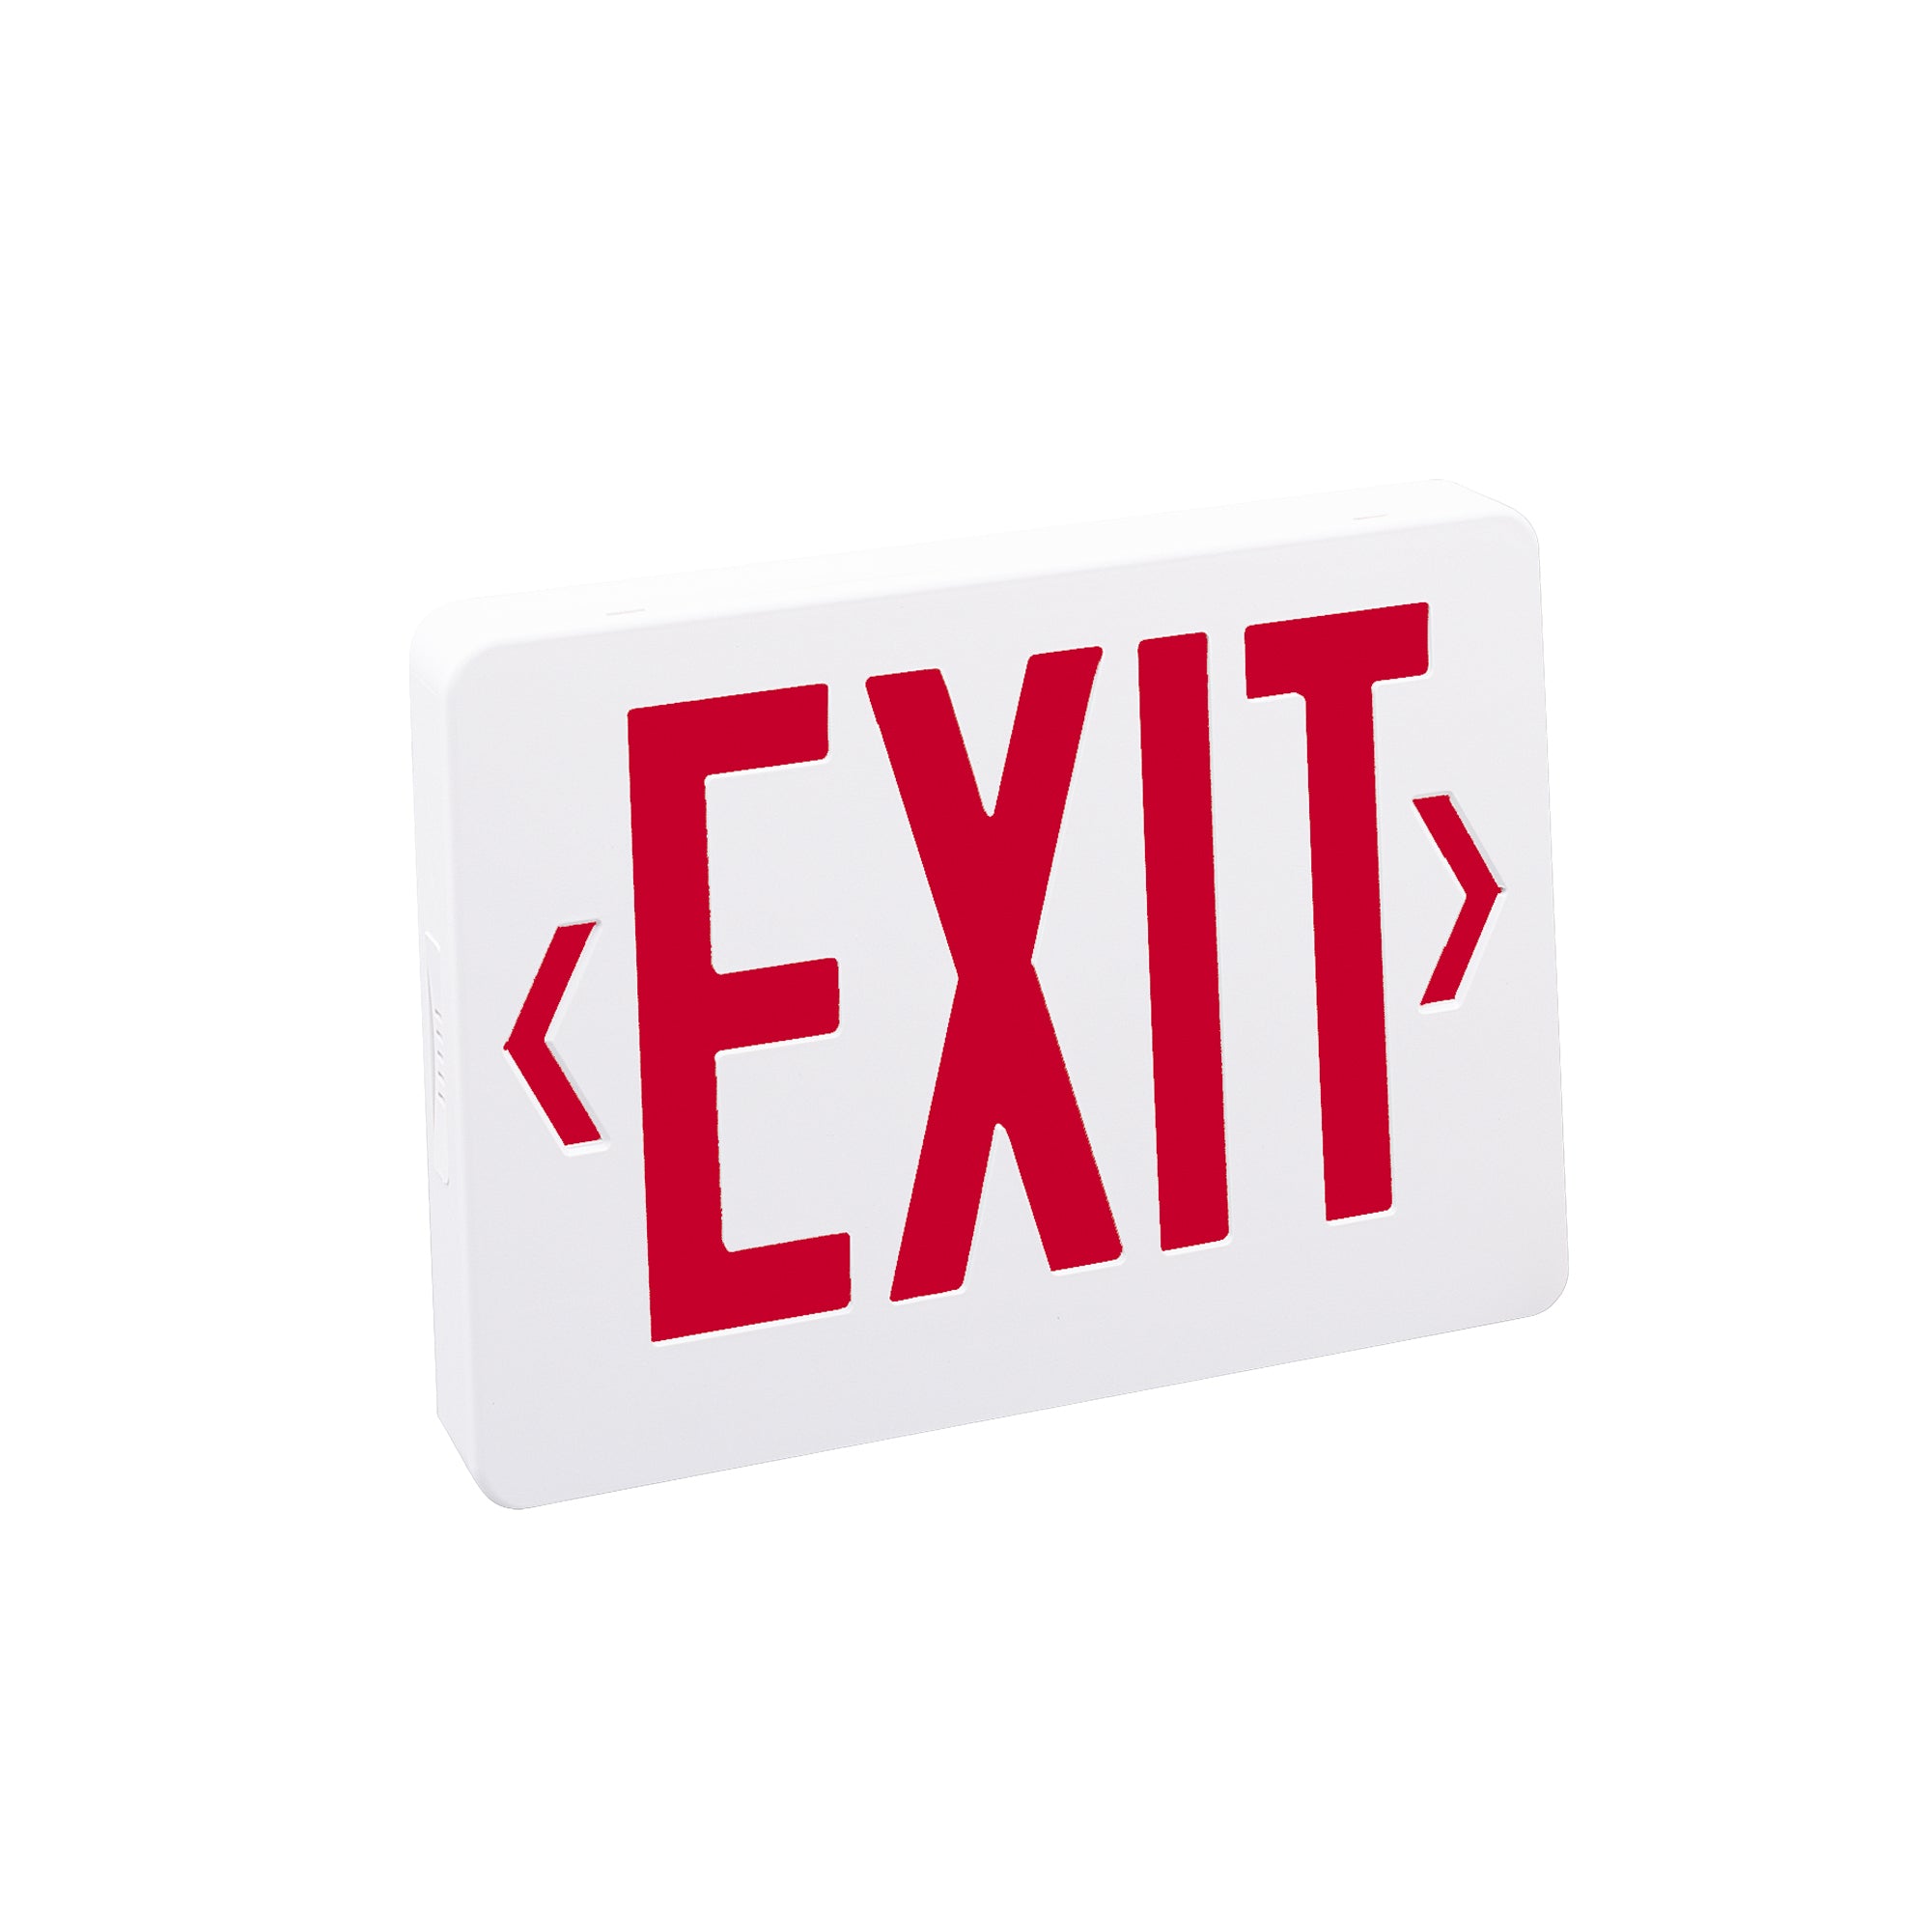 Nora Lighting NX-504-LED/R - Exit / Emergency - Thermoplastic LED Exit Sign, Battery Backup, Red Letters / White Housing, 2 Circuit